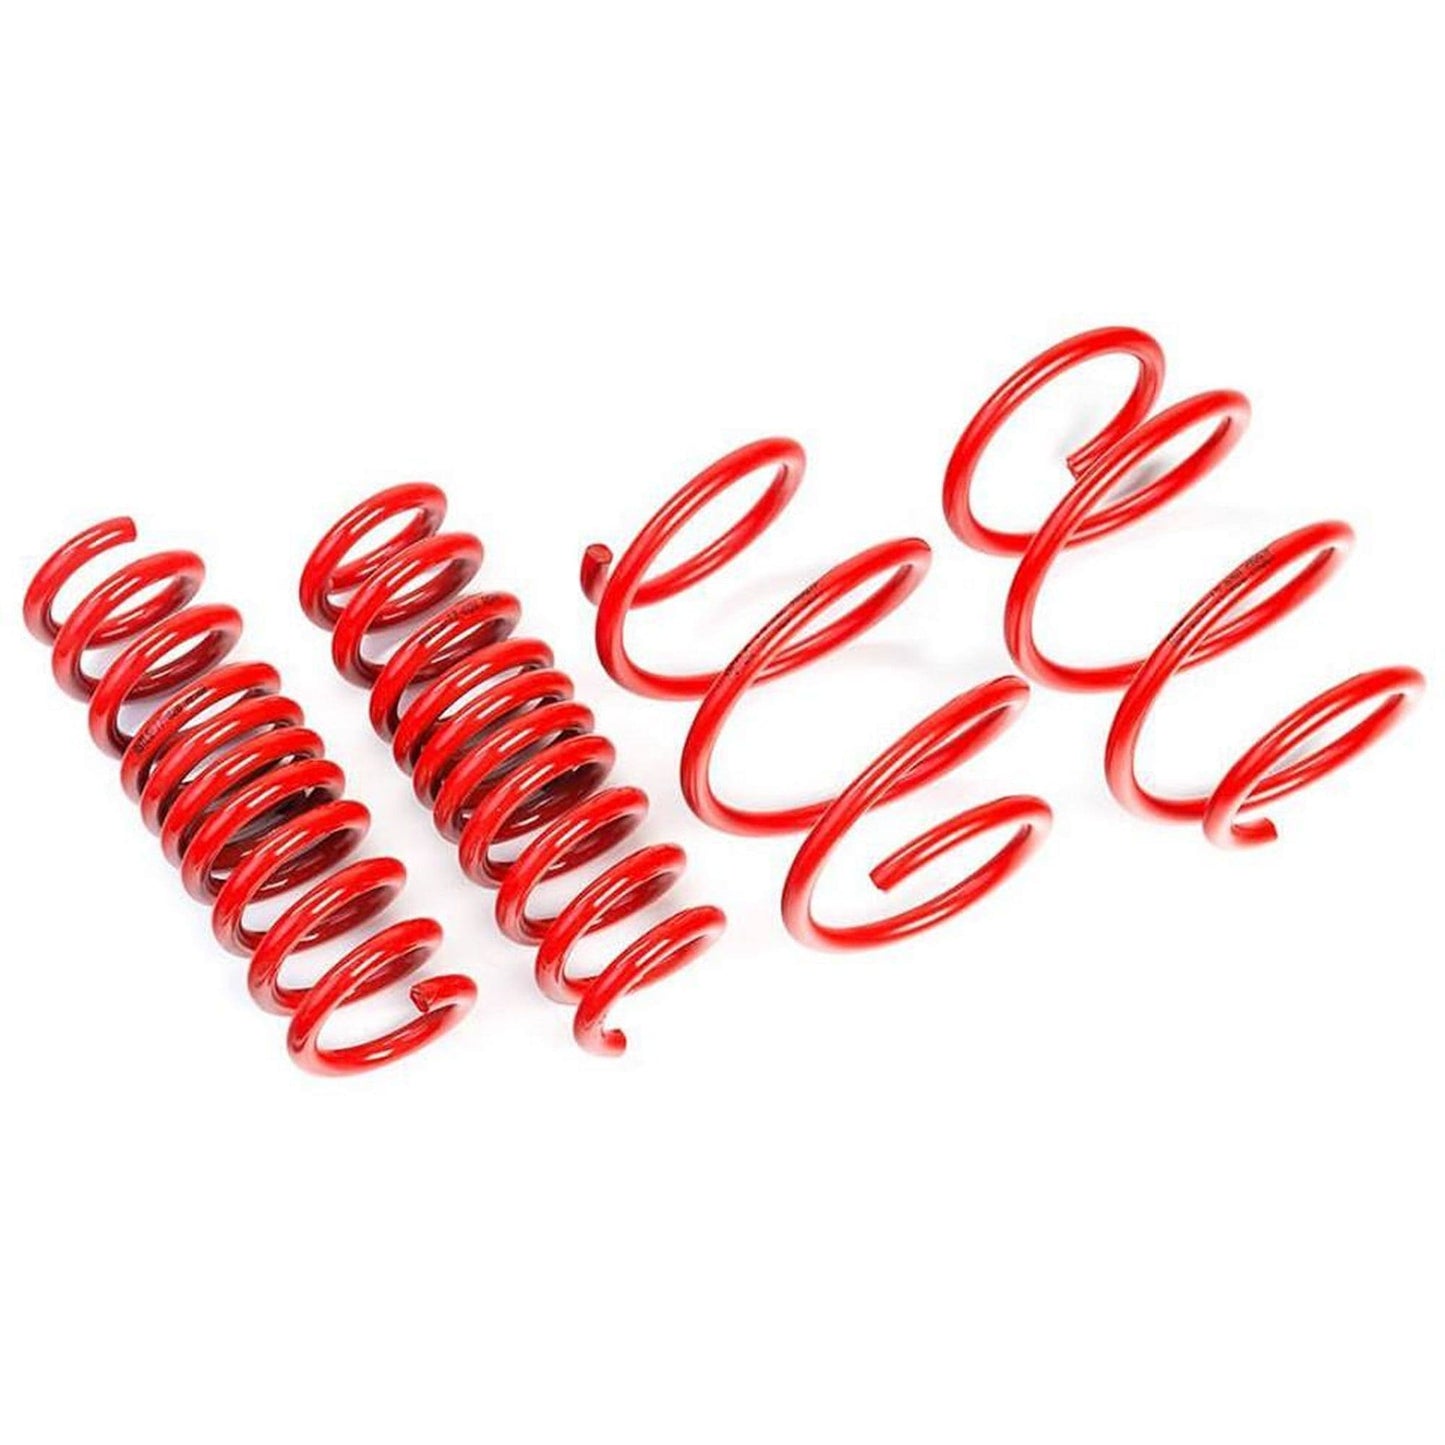 MANHART ASTGP31100 SPORT SPRINGS FOR MINI F56 GP3 BY AST SUSPENSION (25 MM)